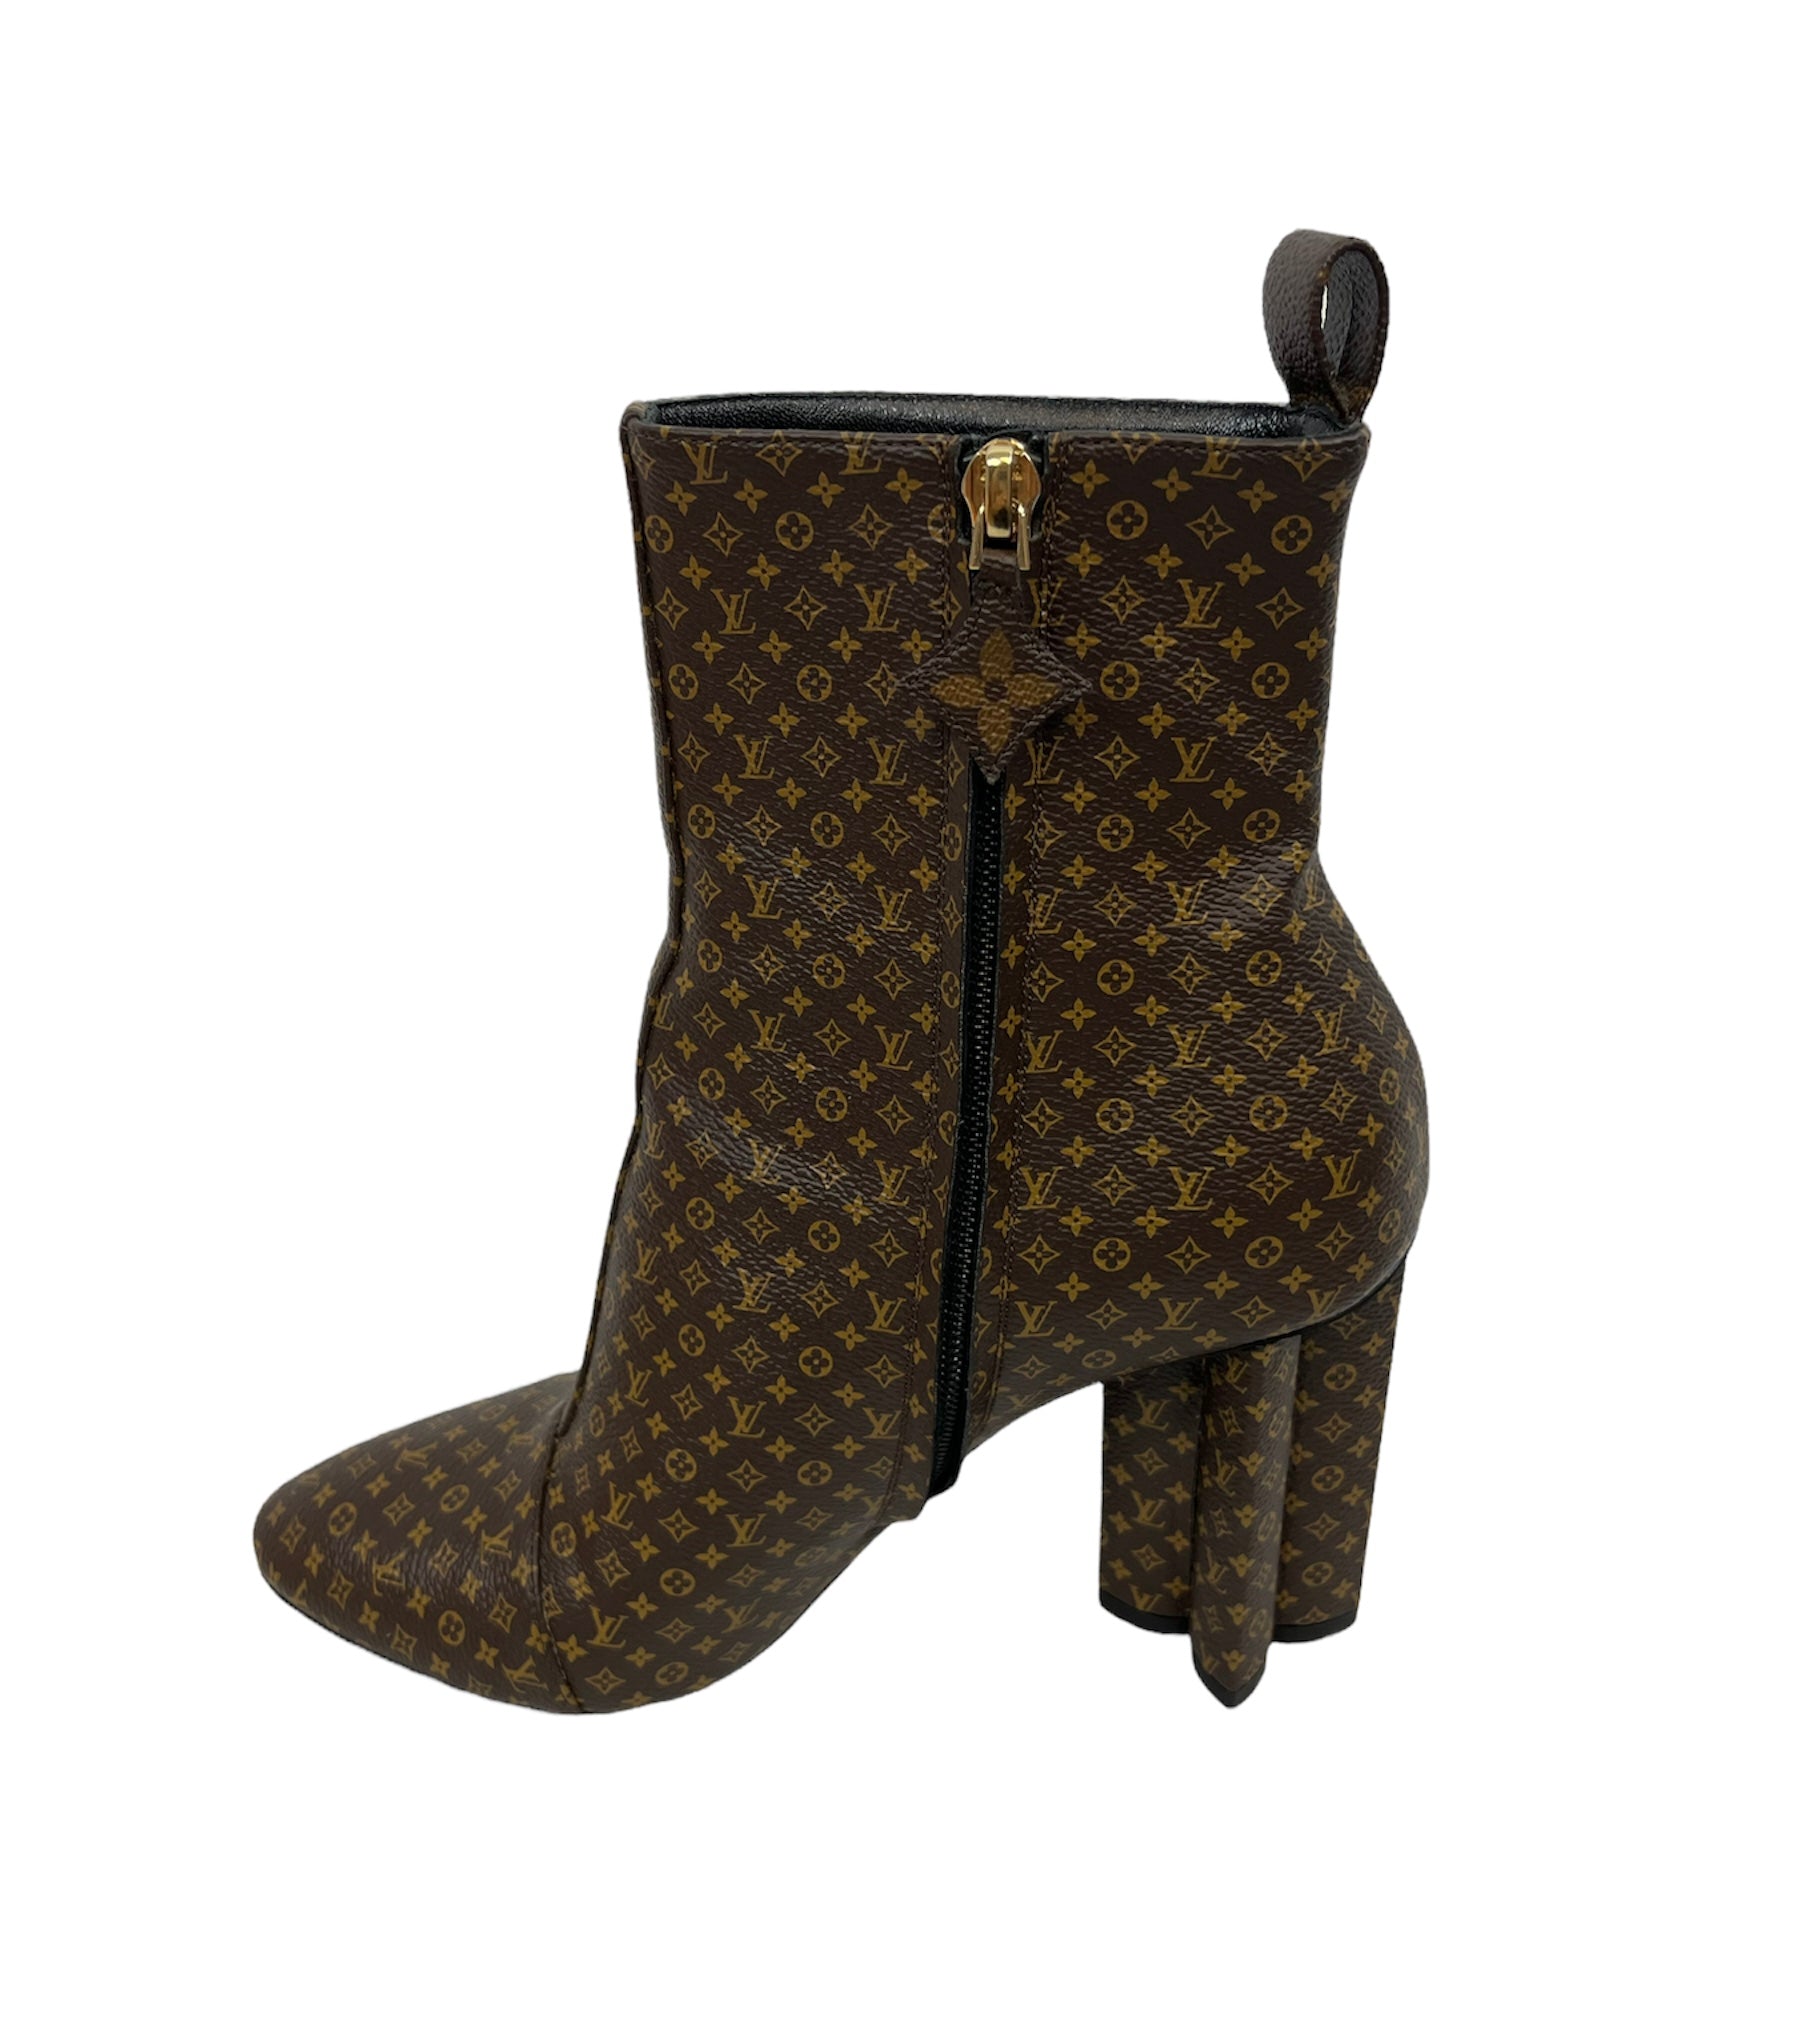 Louis Vuitton's Monogrammed Silhouette Ankle Boots Are a Year